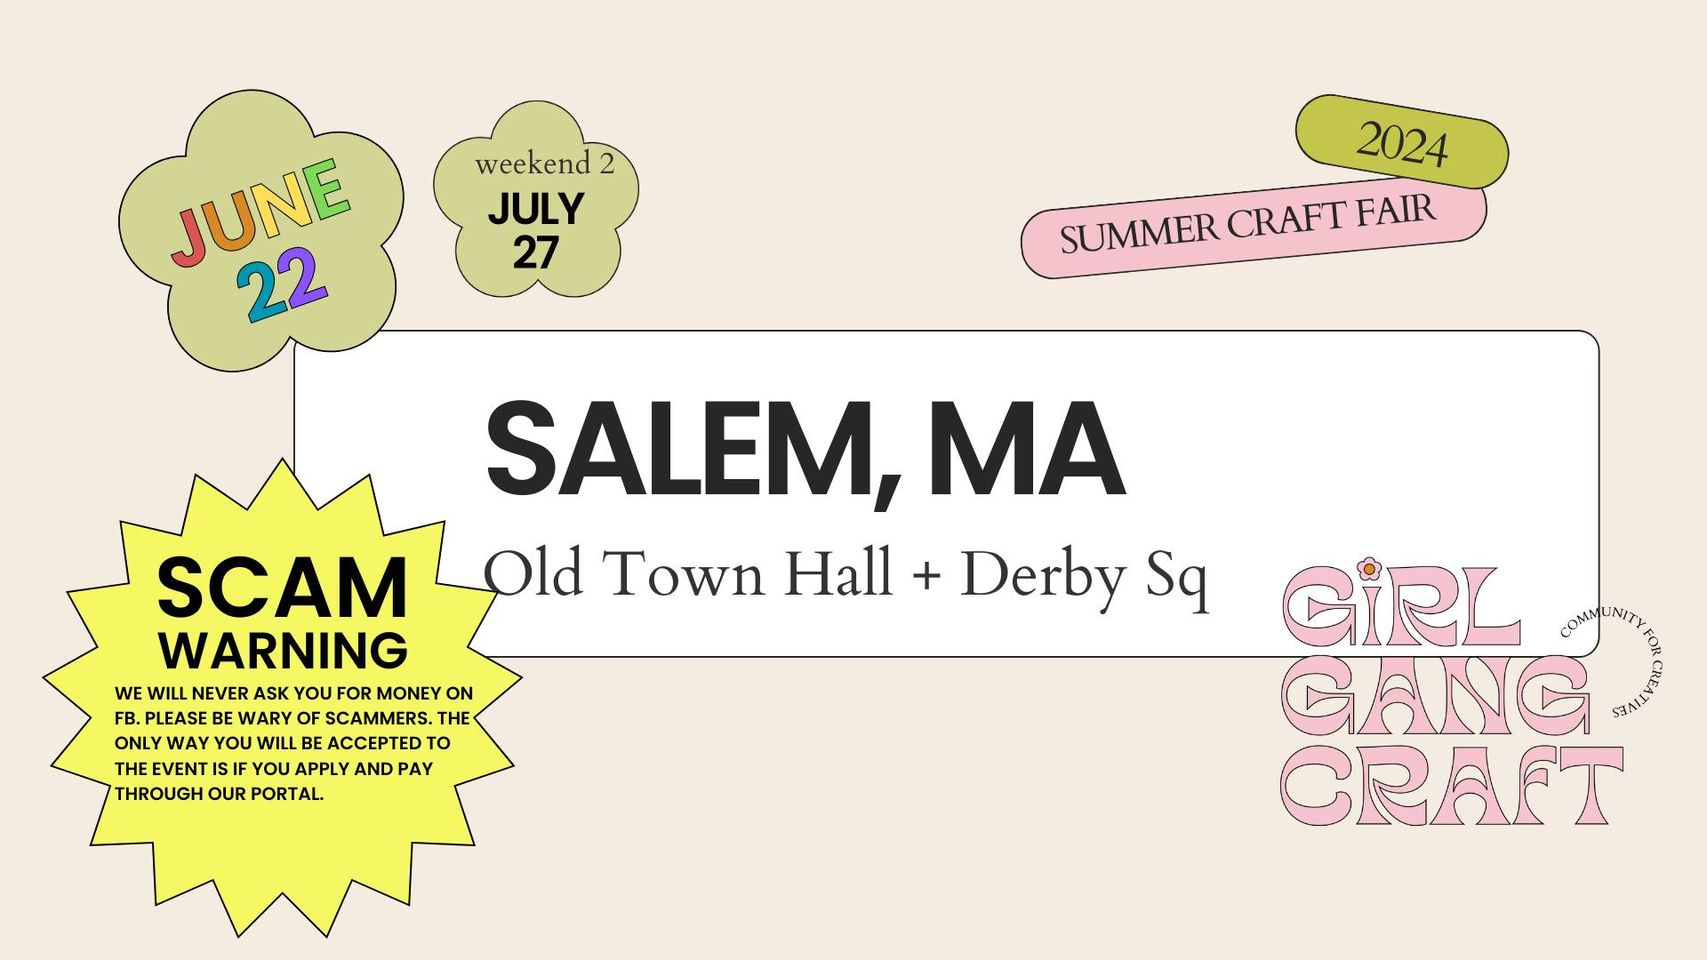 Colorful, fun flyer design for the 2024 Salem, MA summer craft fair showcasing event dates with a cautionary note on scams.